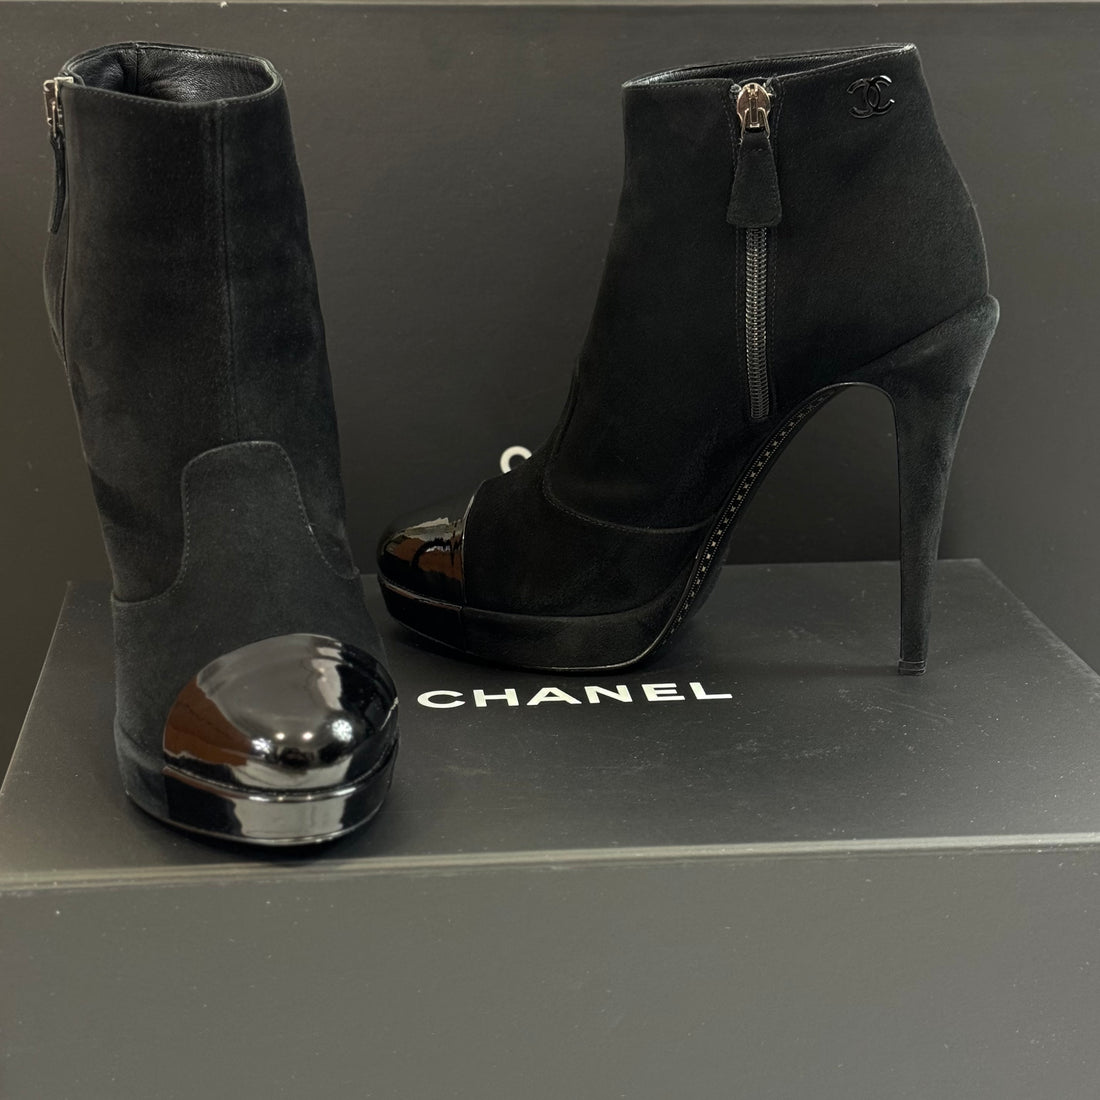 Chanel - 高跟踝靴 T.40